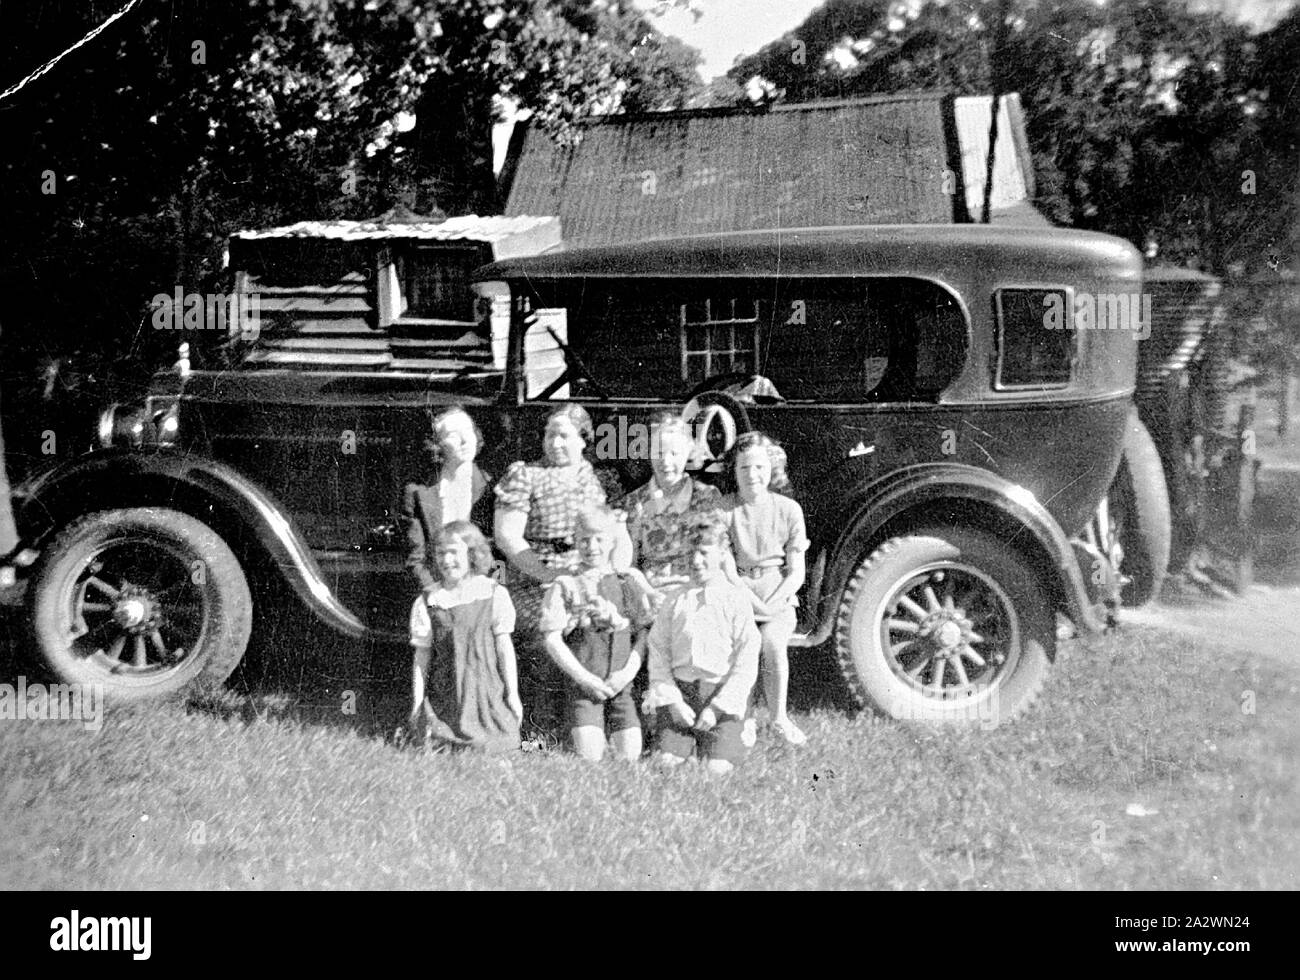 Negative - Murphy Family Seated on the Running Board of their Studebaker Car, Creswick, Victoria, circa 1930, The Murphy family seated on the running board of their Studebaker car Stock Photo